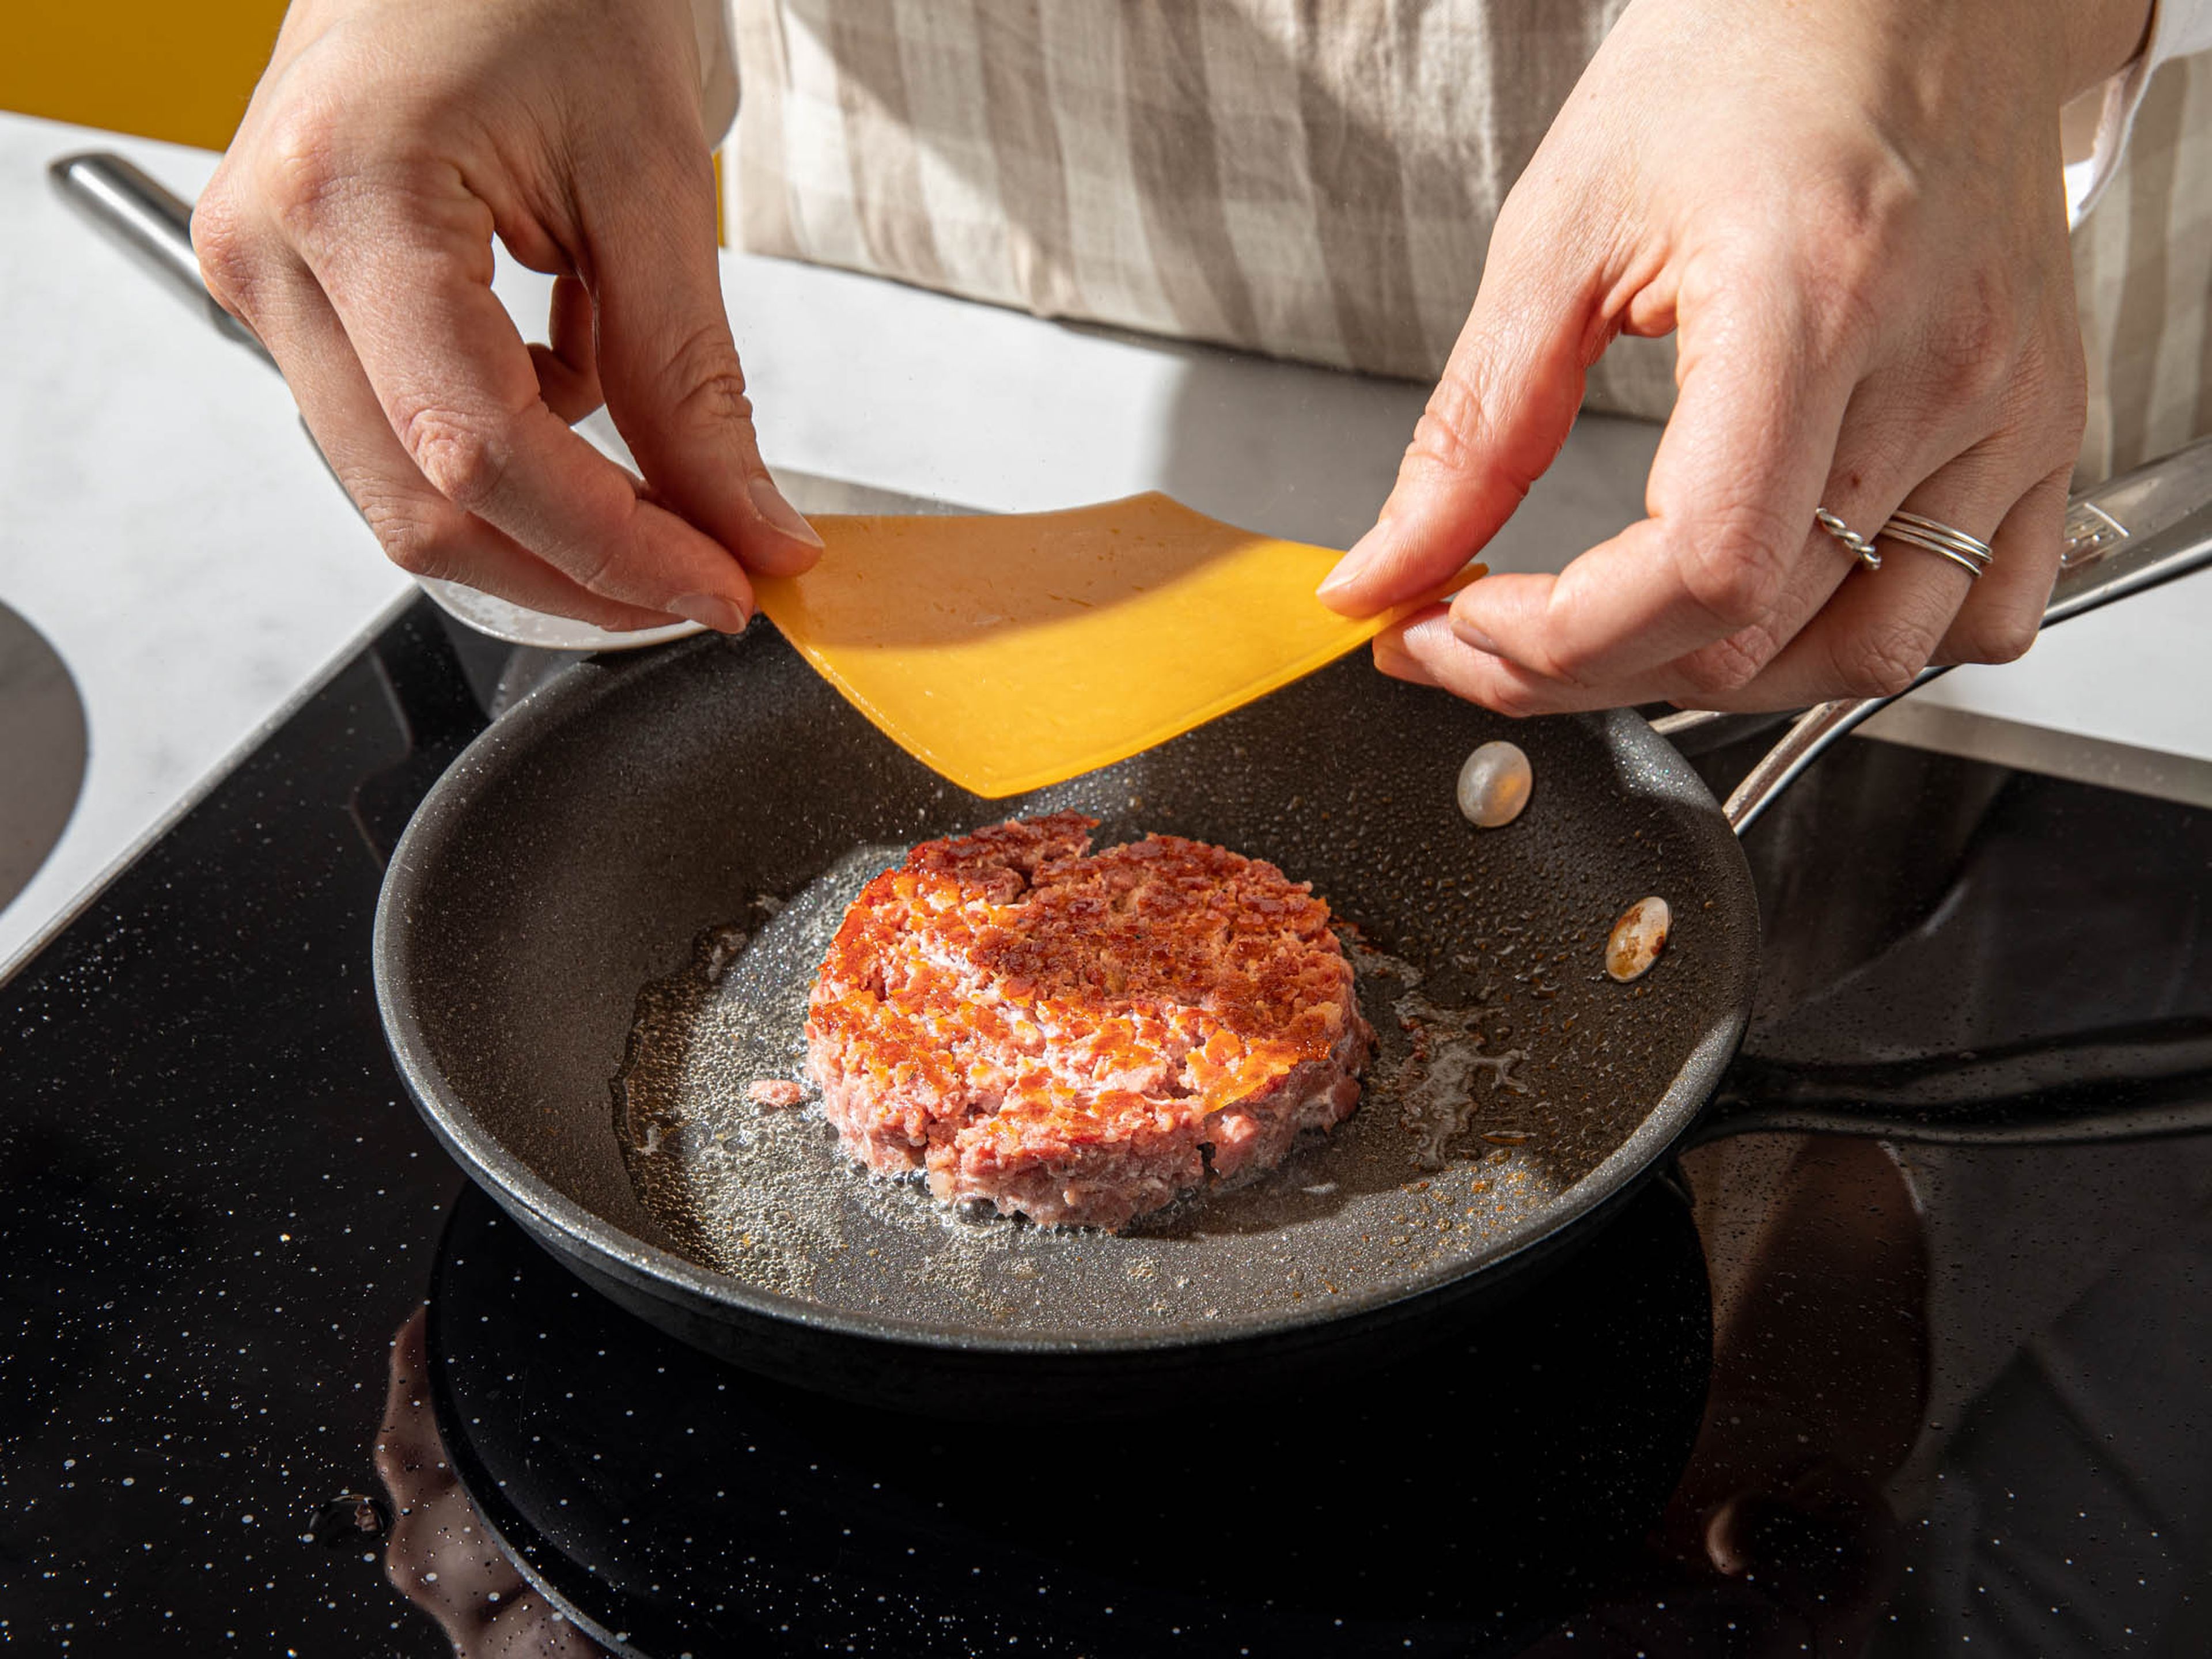 Preheat the oven to a ‘keep warm’ setting. Remove Italian sausage meat from casing. Use your fingers to crumble the meat until fine, with no large clumps, and press very tightly into an egg ring to create a patty—you can also make your own ring using aluminium foil. Heat a frying pan over high heat. Once the pan is hot, carefully add the sausage patty (still in the ring). Fry for approx. 3-4 min, or until well-browned. Carefully flip it over, remove the ring, and place a slice of cheddar on top to melt. Continue to fry for another 3 min., until the cheese is very melted and the patty browned. Transfer to a plate and place in the warmed oven. Don’t wash up the pan, you'll use the residual fat in the next step.